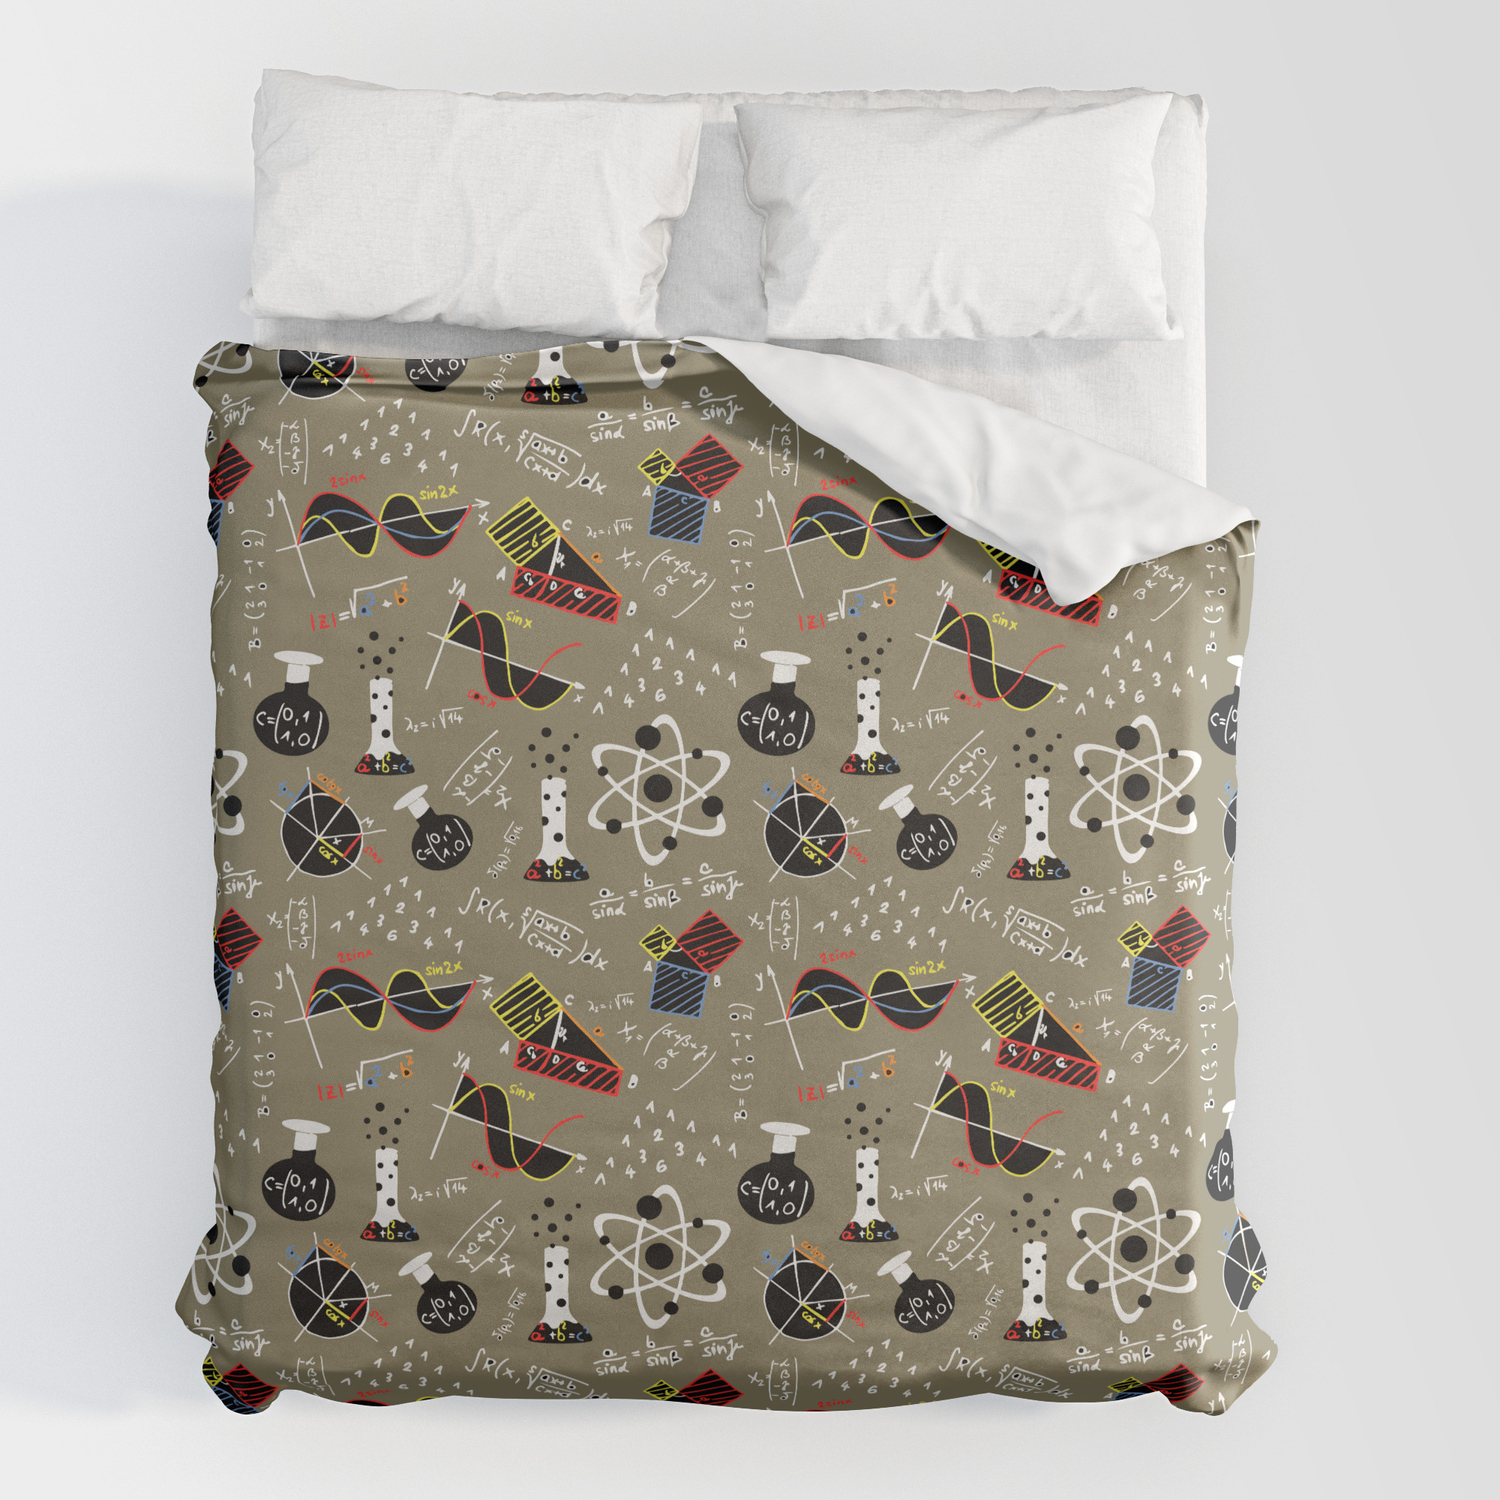 Science Duvet Cover By Beach Please, Science Duvet Cover